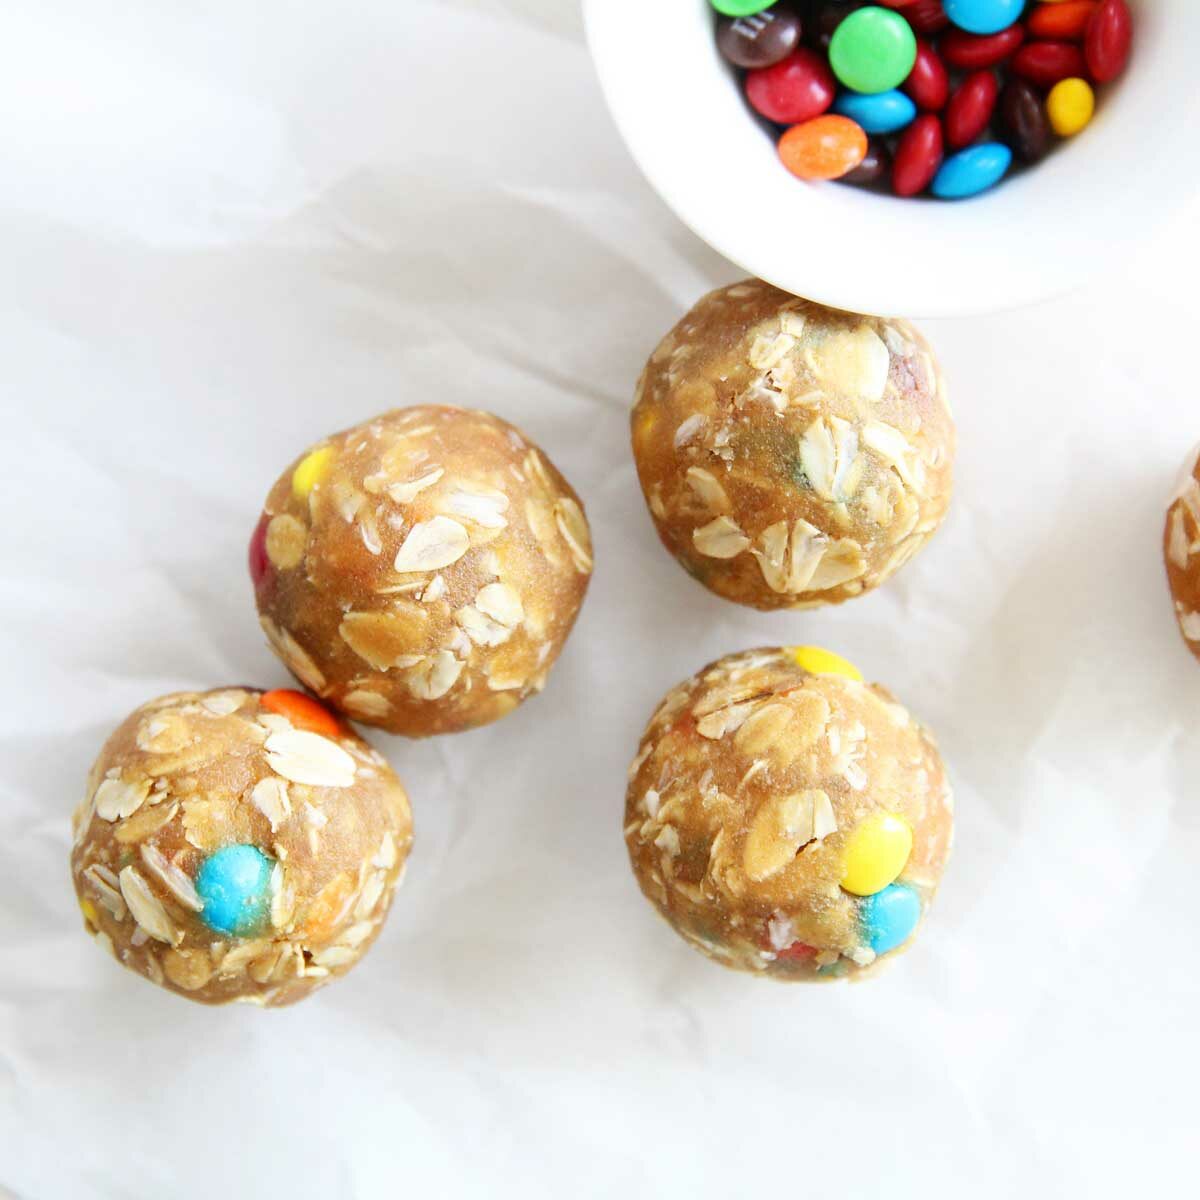 Healthy Monster Cookie Protein Balls Made with Collagen Peptides